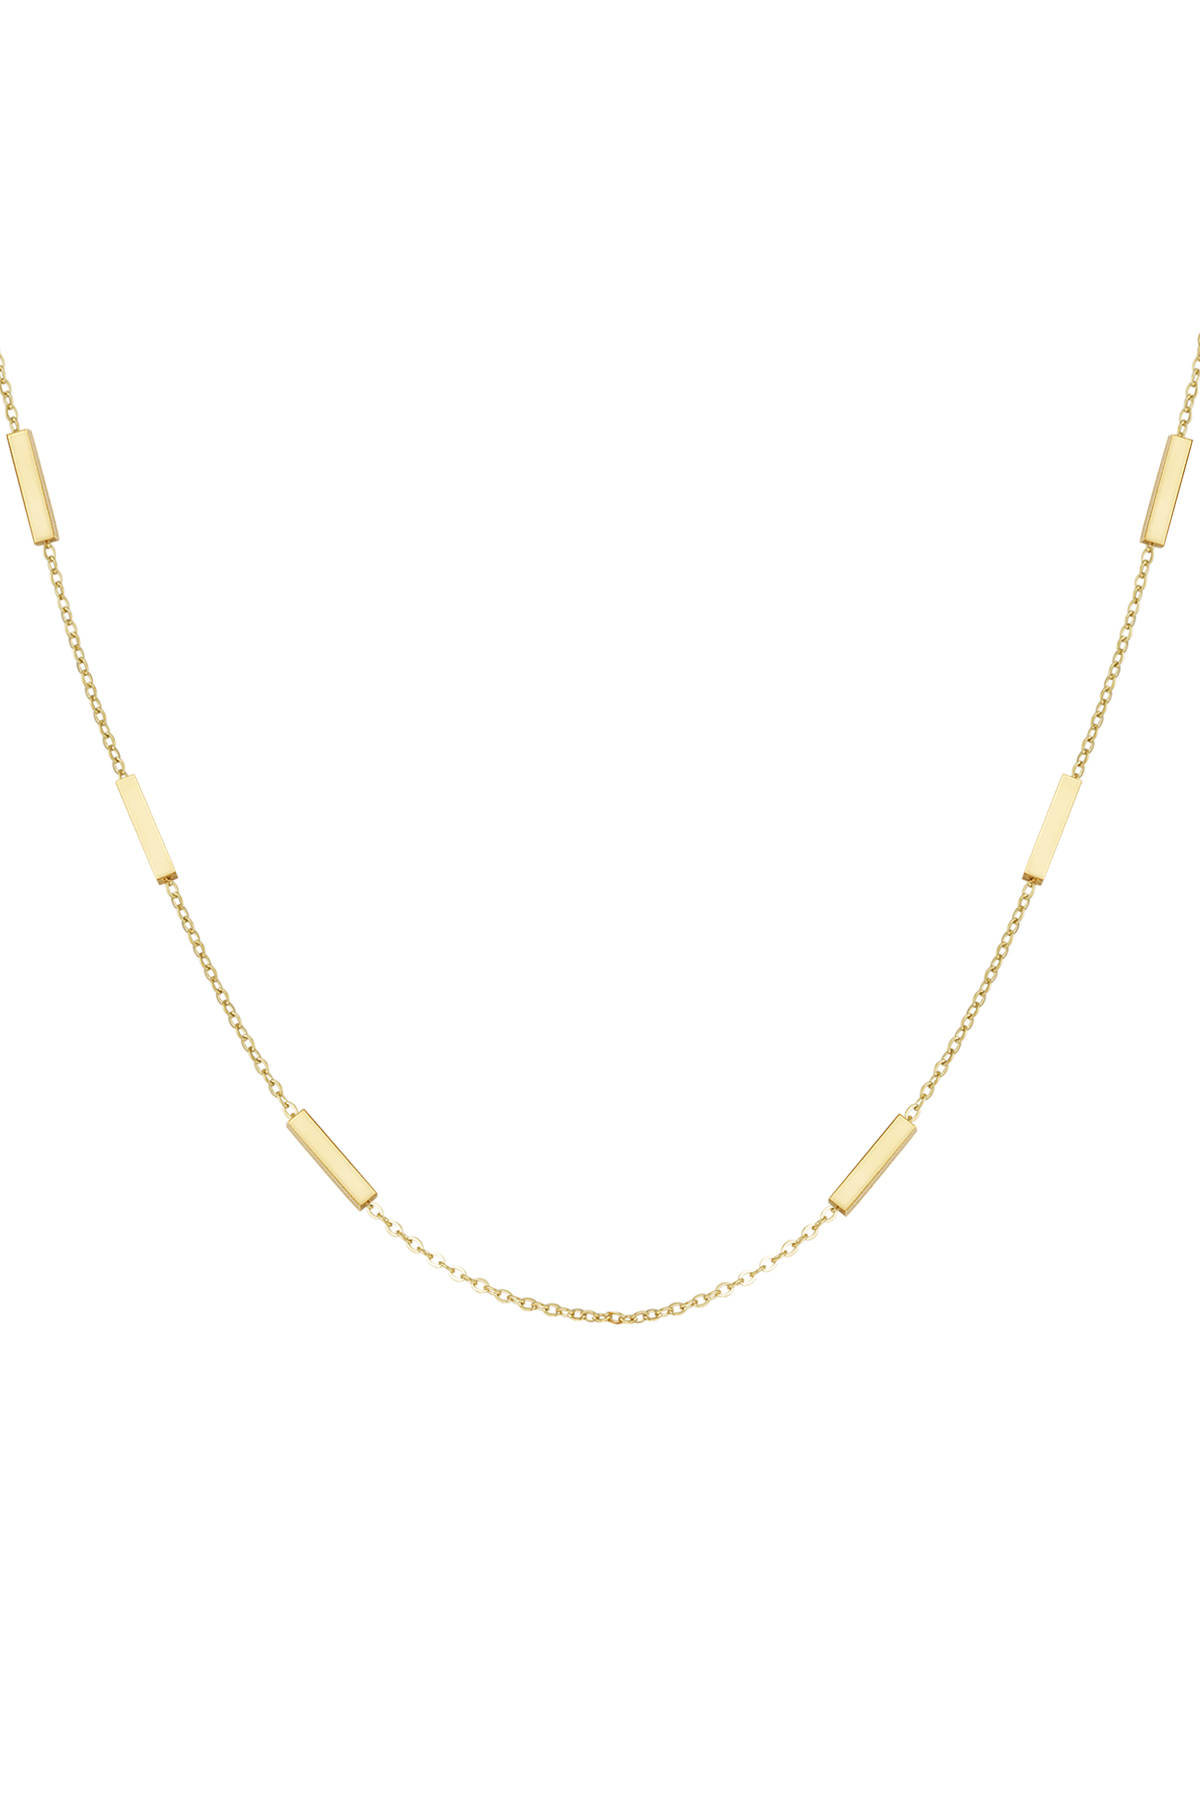 Necklace tube charms - gold h5 